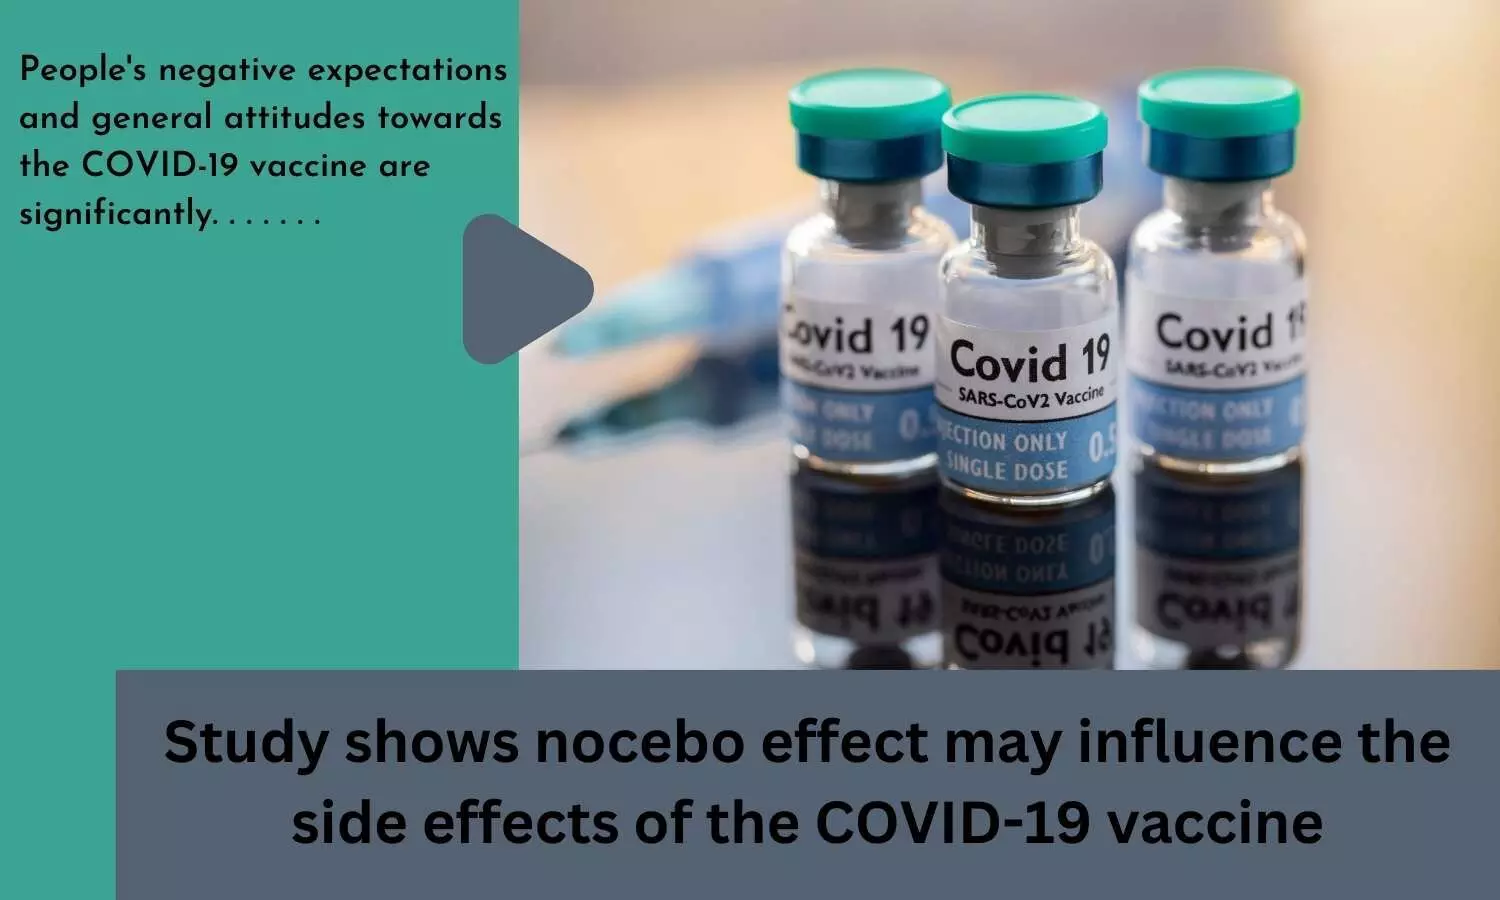 Study shows nocebo effect may influence the side effects of the COVID-19 vaccine